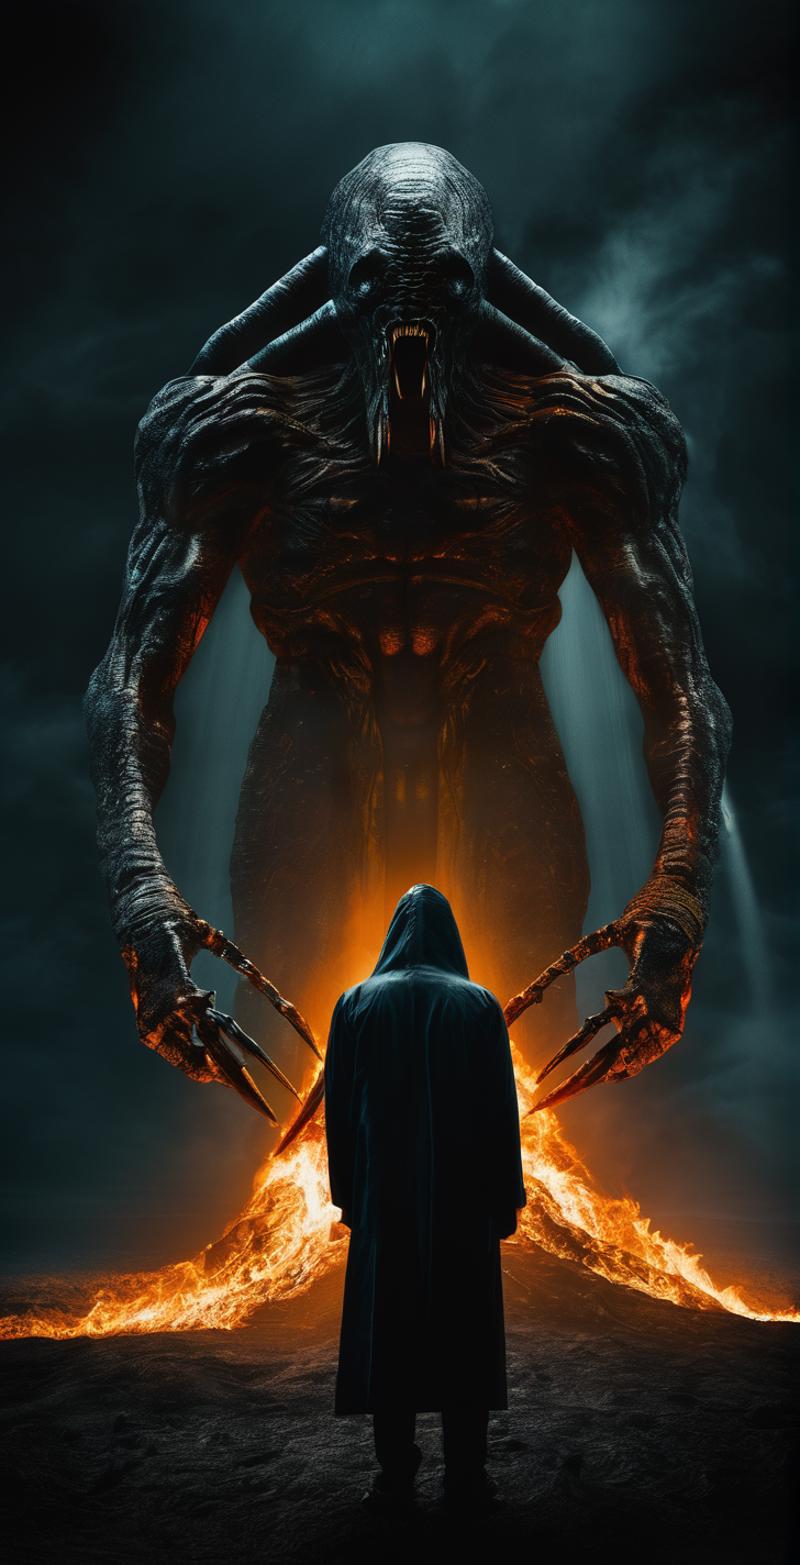 A man standing in front of a giant demon with a sword.